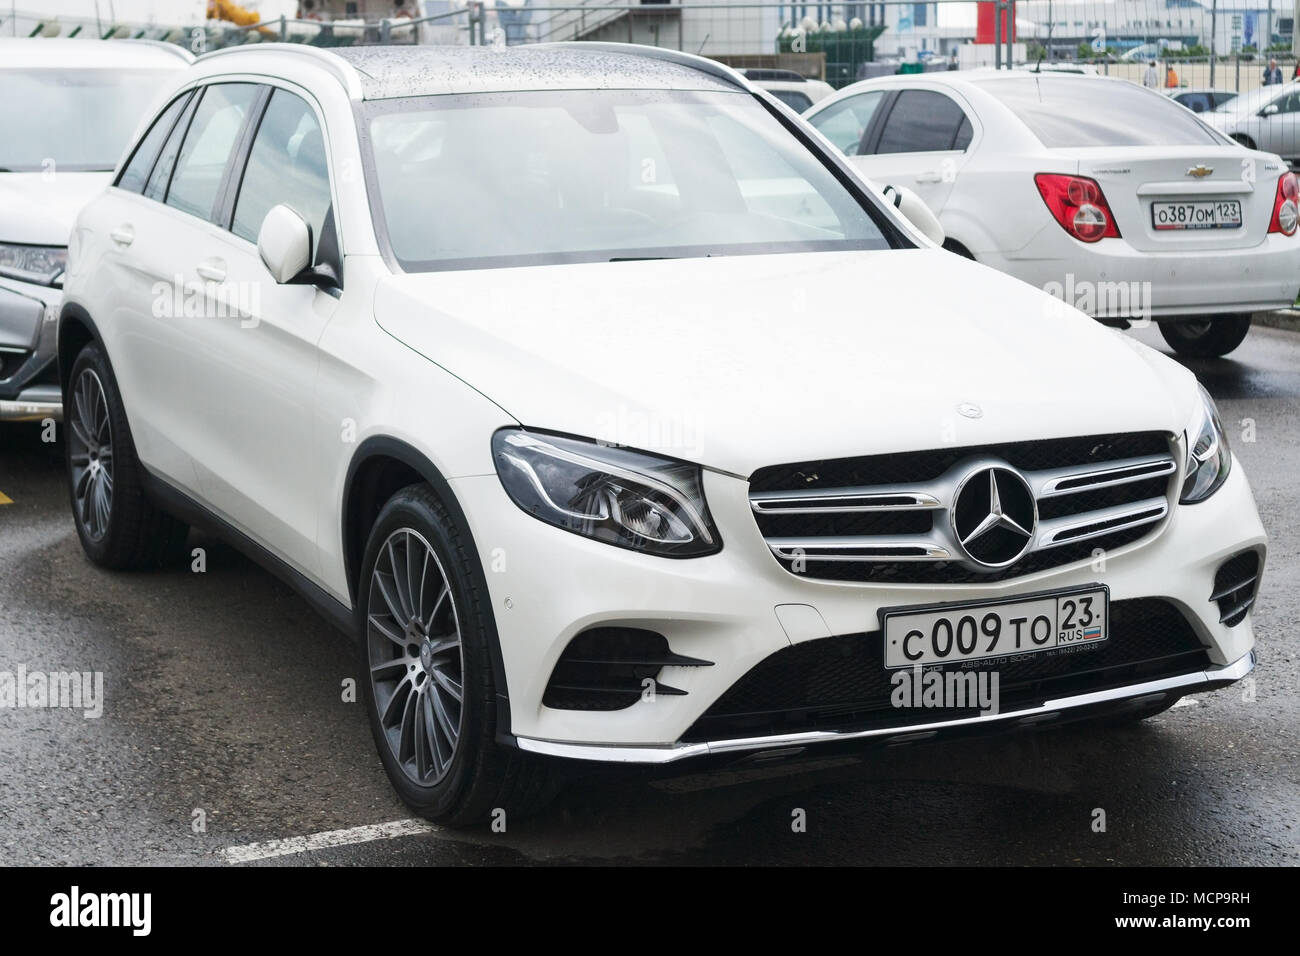 Sochi, Russia - October 12, 2016: New luxury white Mercedes Benz parked on the parking. Stock Photo